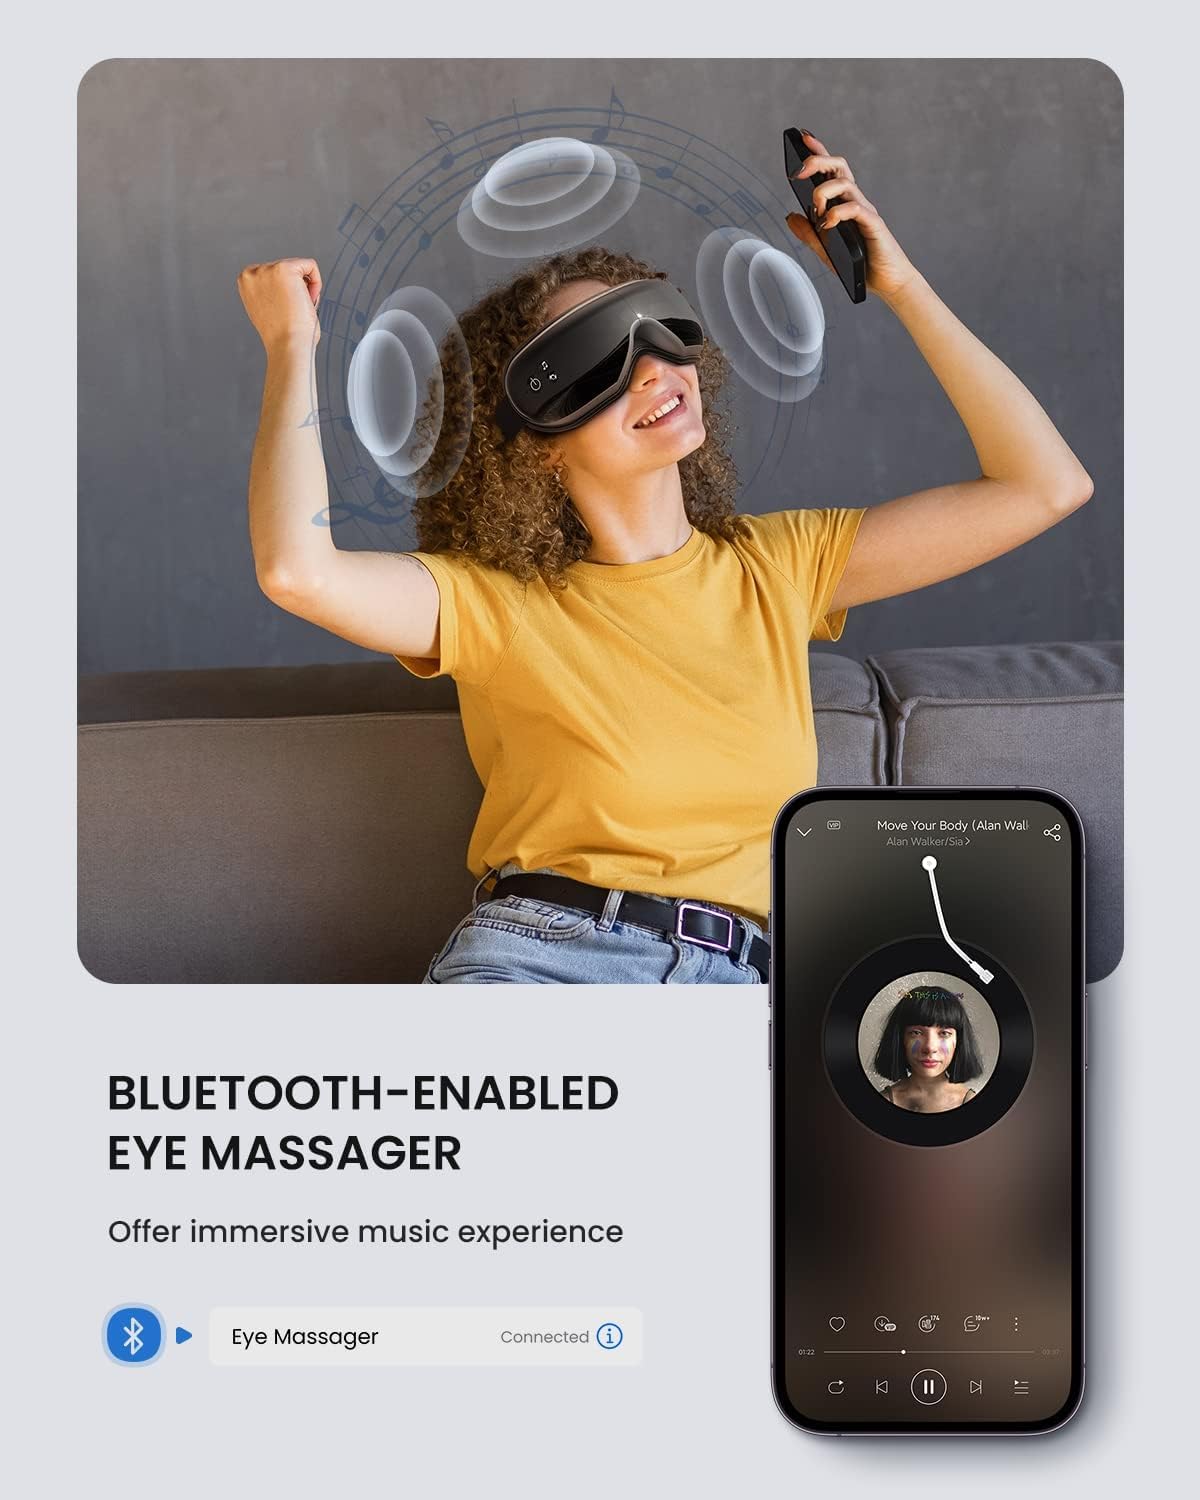 A young woman with curly hair, wearing a yellow t-shirt, enjoys a Renpho Eyeris 1 Eye Massager featuring bluetooth connectivity while lifting her arms in relaxation. Next to her is an image of a smartphone displaying the